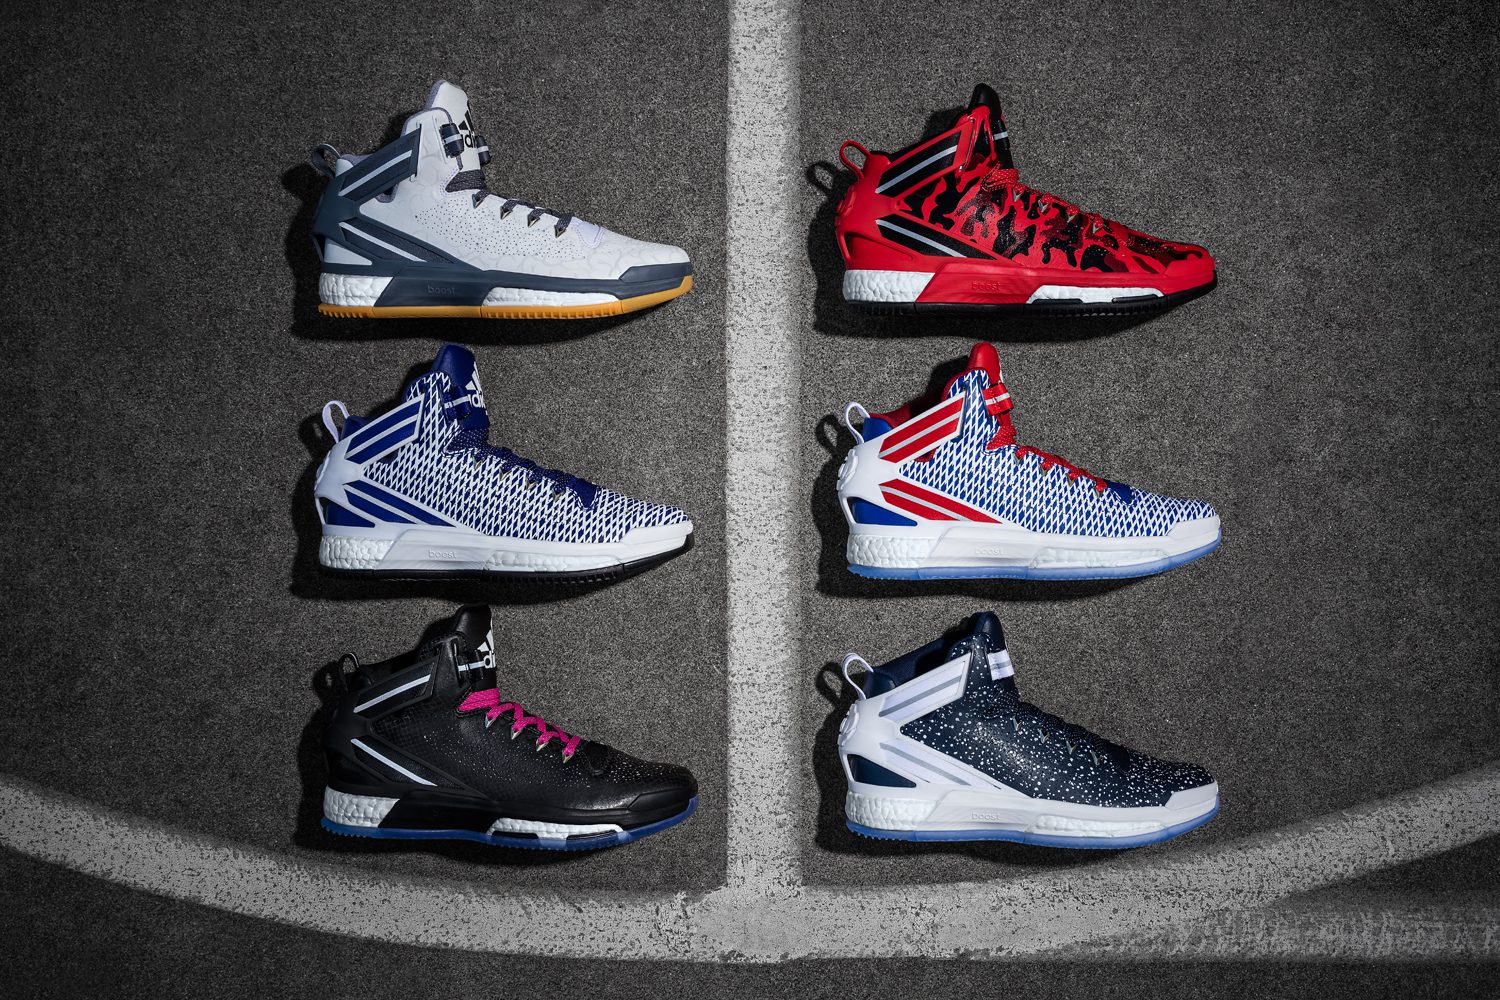 adidas D Rose 6 miadidas gives fans a 